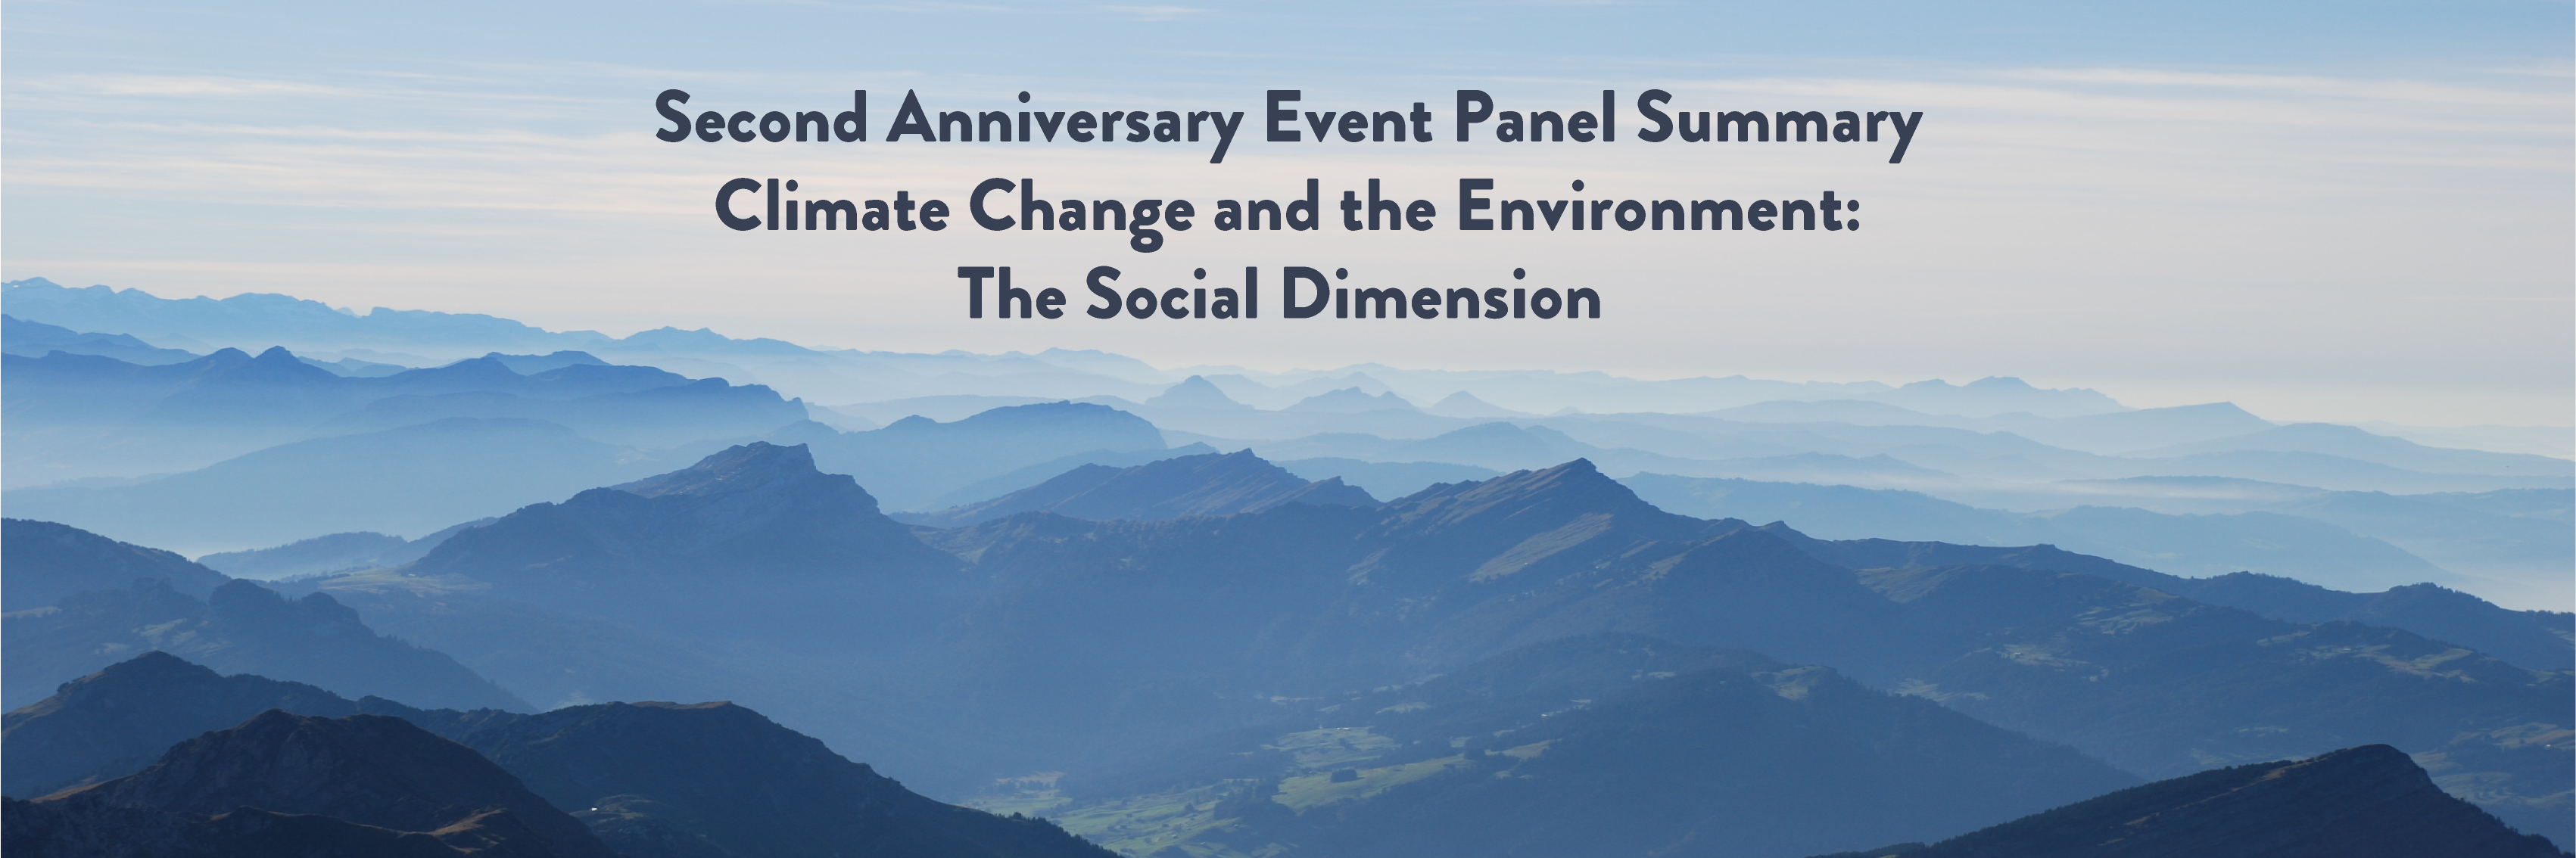 Second Anniversary Event Summary: Climate Change and the Environment, the Social Dimension